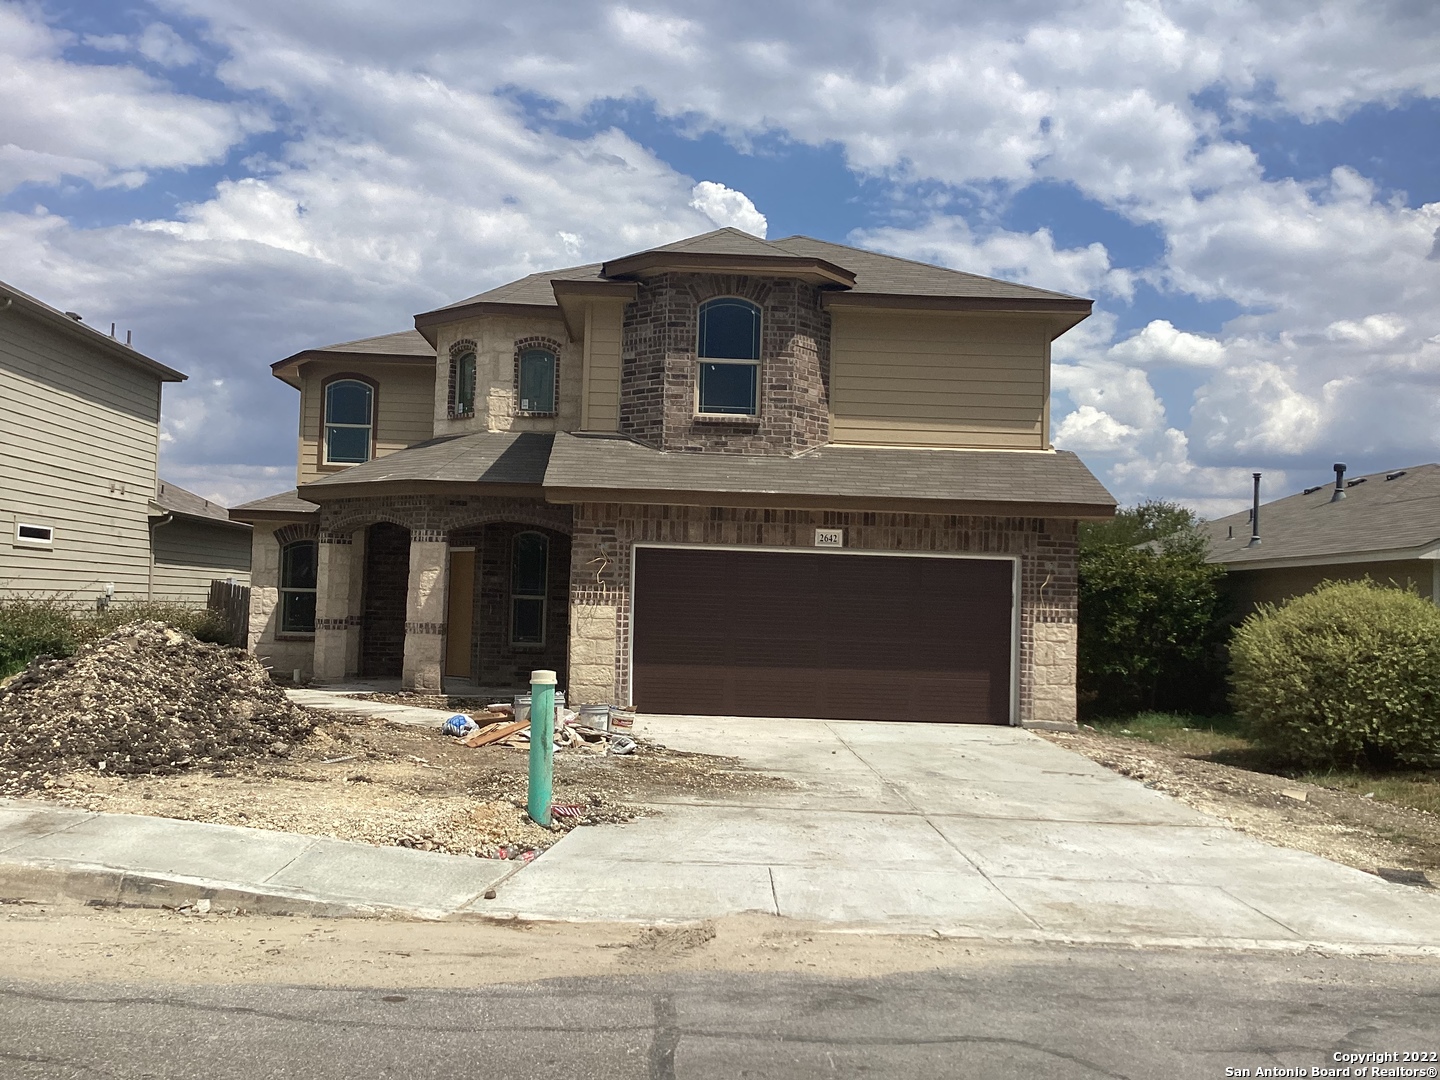 4 bedrooms, with master on main. High ceilings with grand foyer. Bridge way that over looks bottom floor.  Upgrades throughout.  Home will have full landscaping with auto sprinklers. Built in appliance. Close to pool and park. Schools close by with shopping.